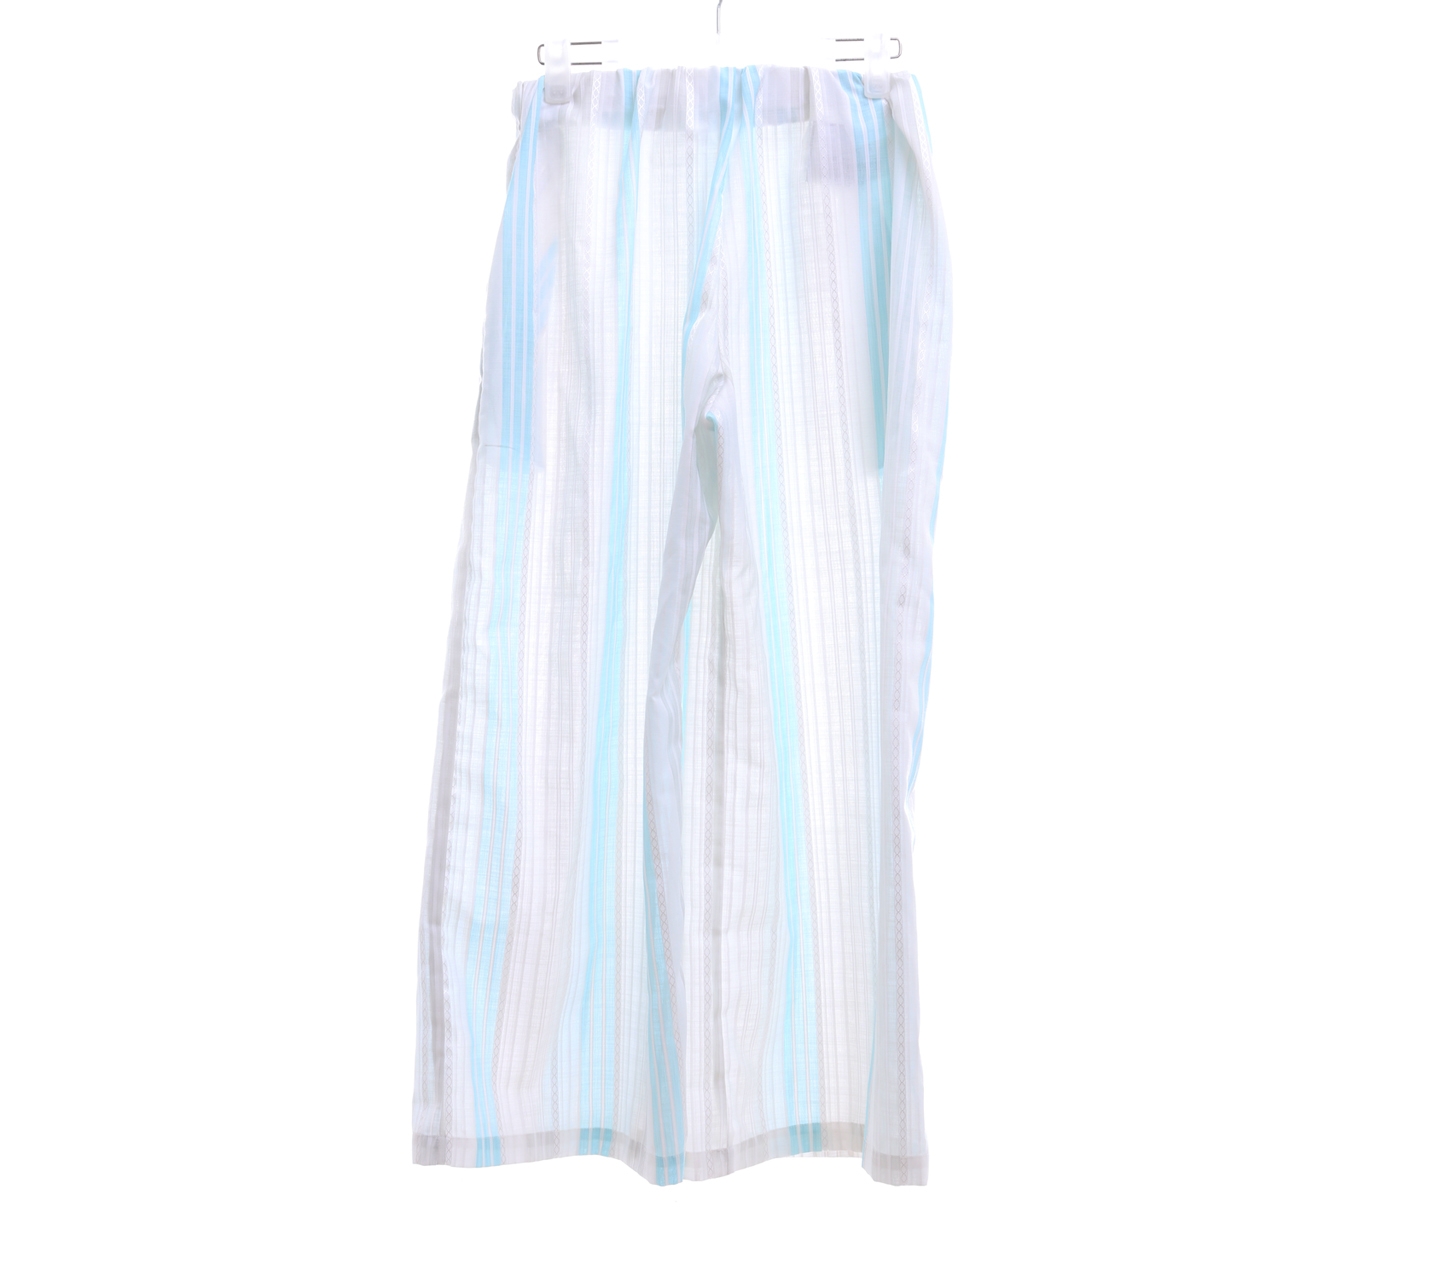 Nikicio White Label Off White and Blue Cullotes Long Pants